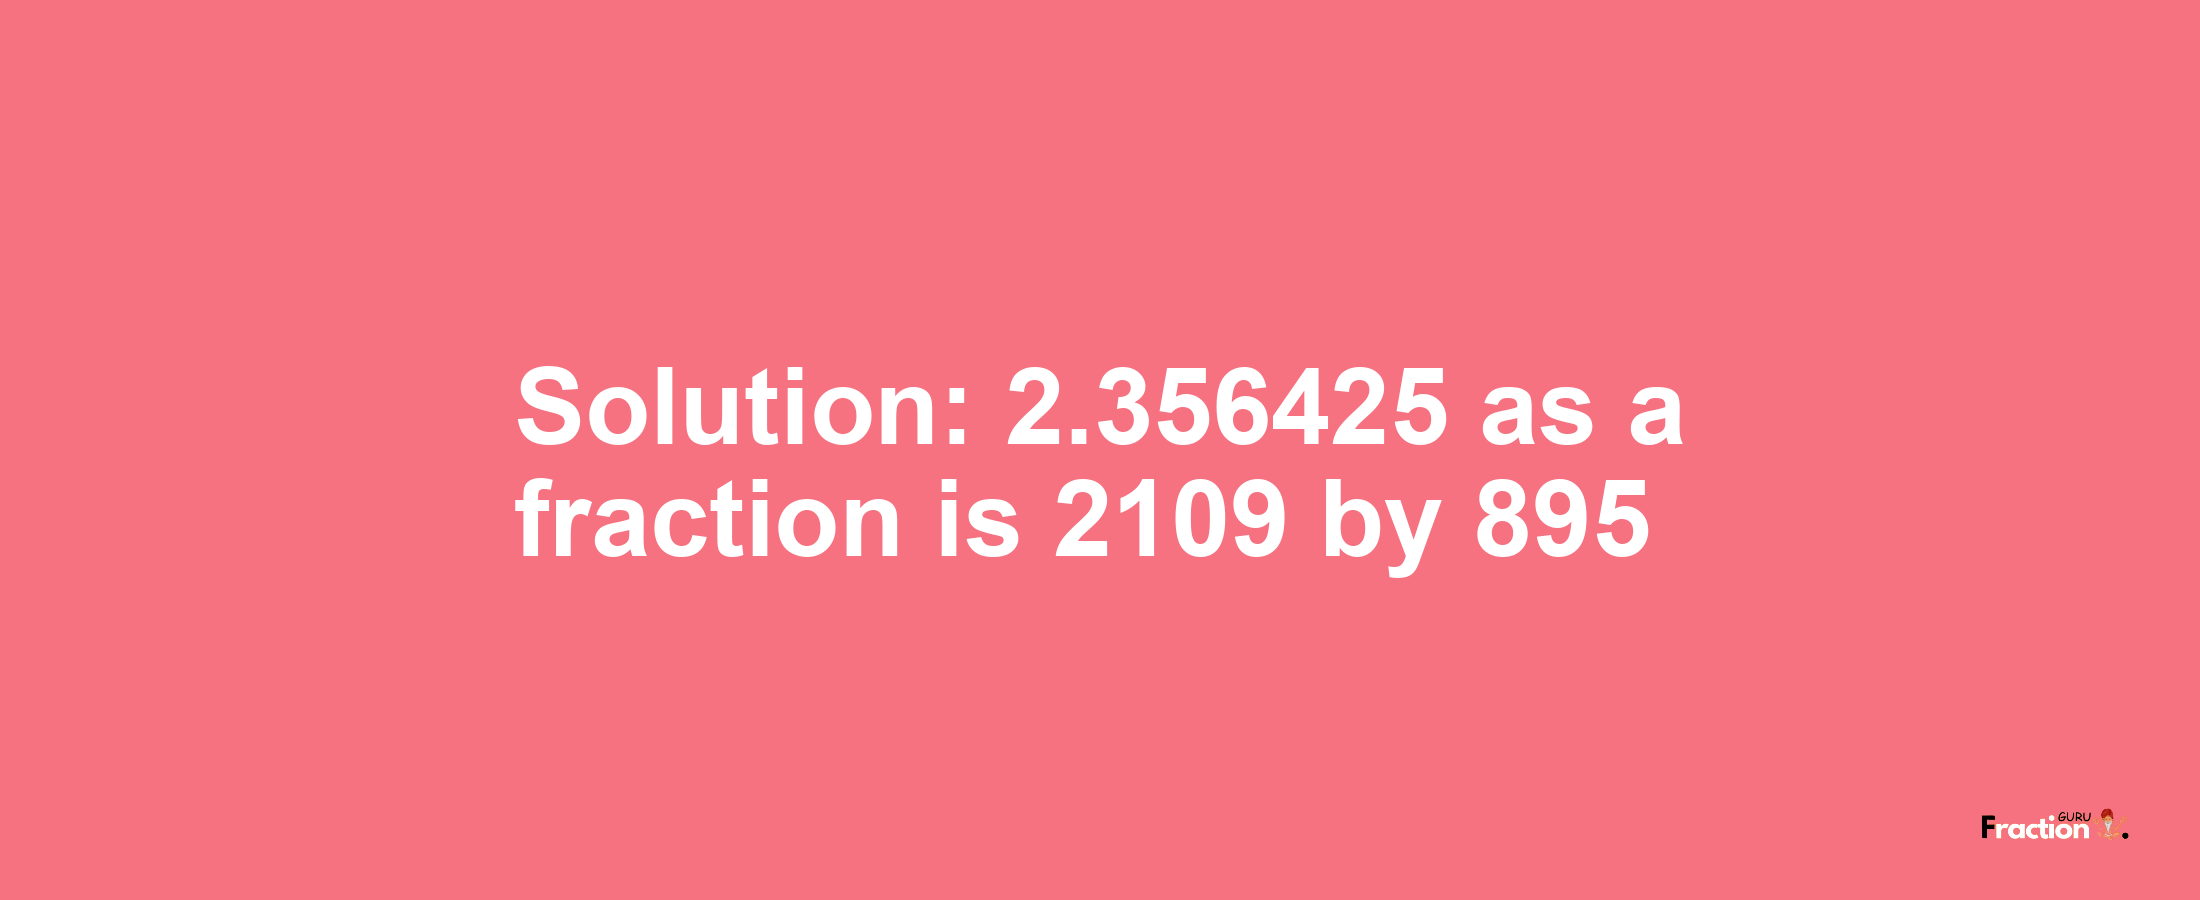 Solution:2.356425 as a fraction is 2109/895